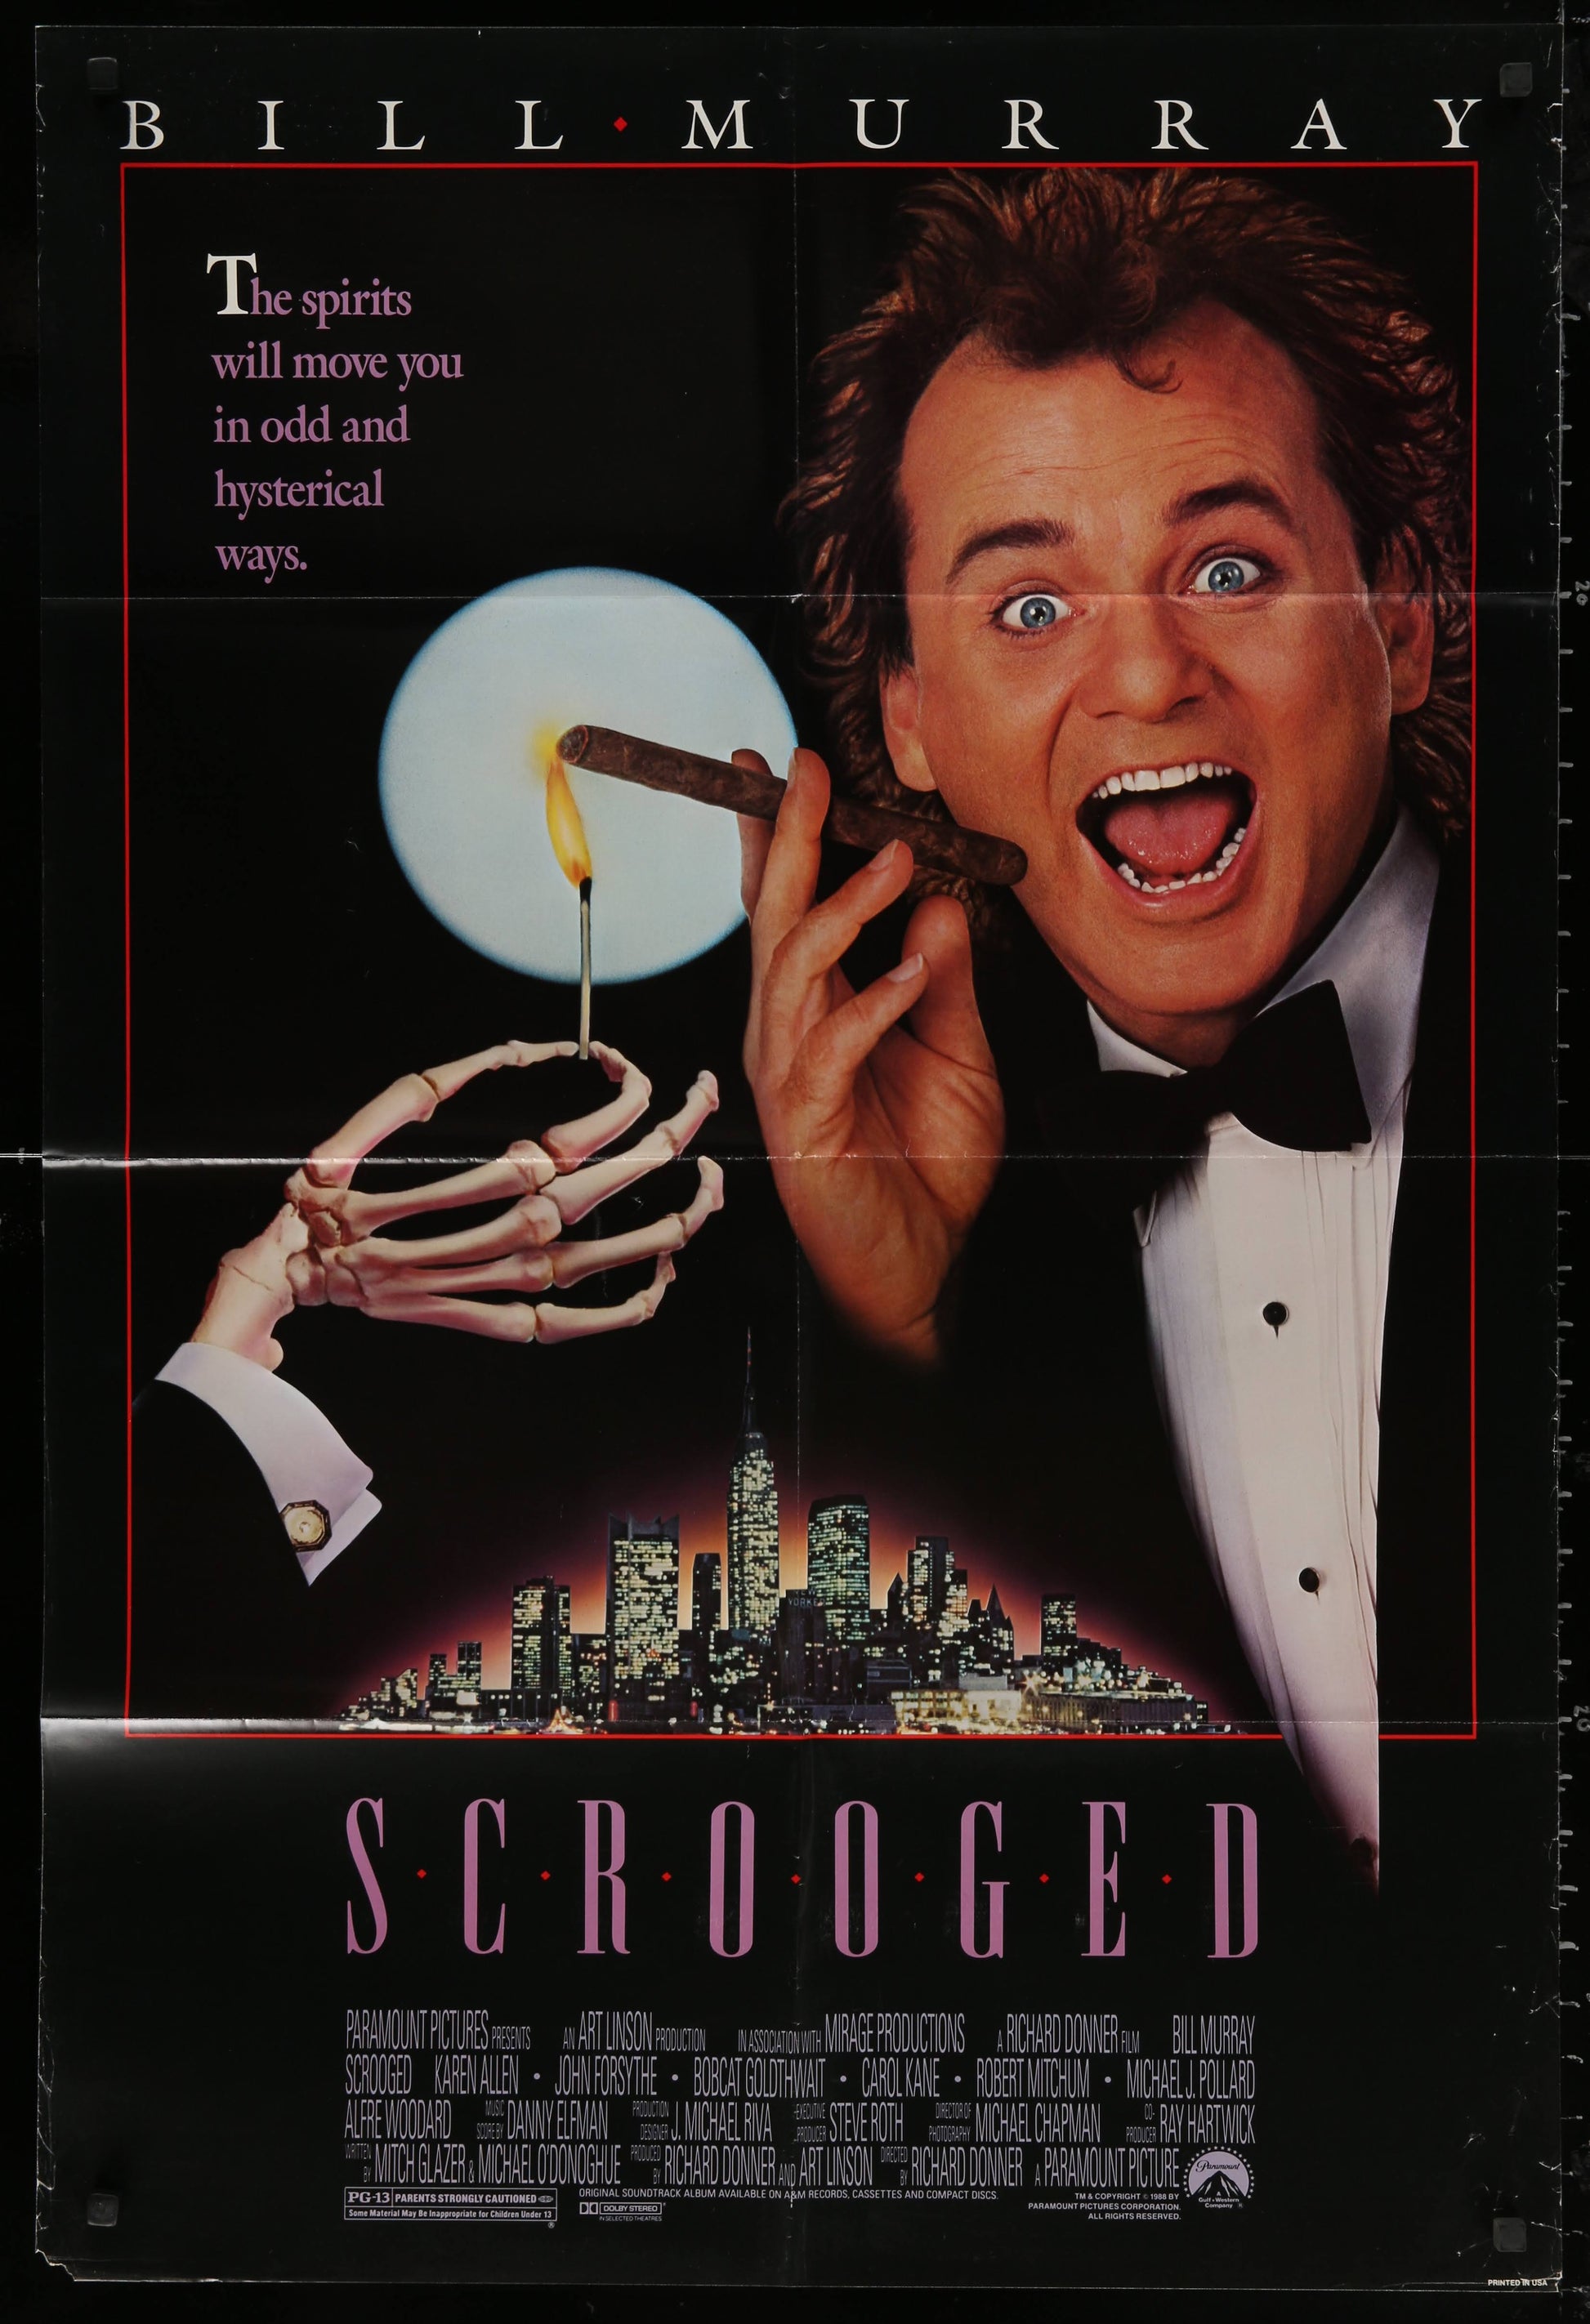 Scrooged US One Sheet (1988) - ORIGINAL RELEASE - posterpalace.com